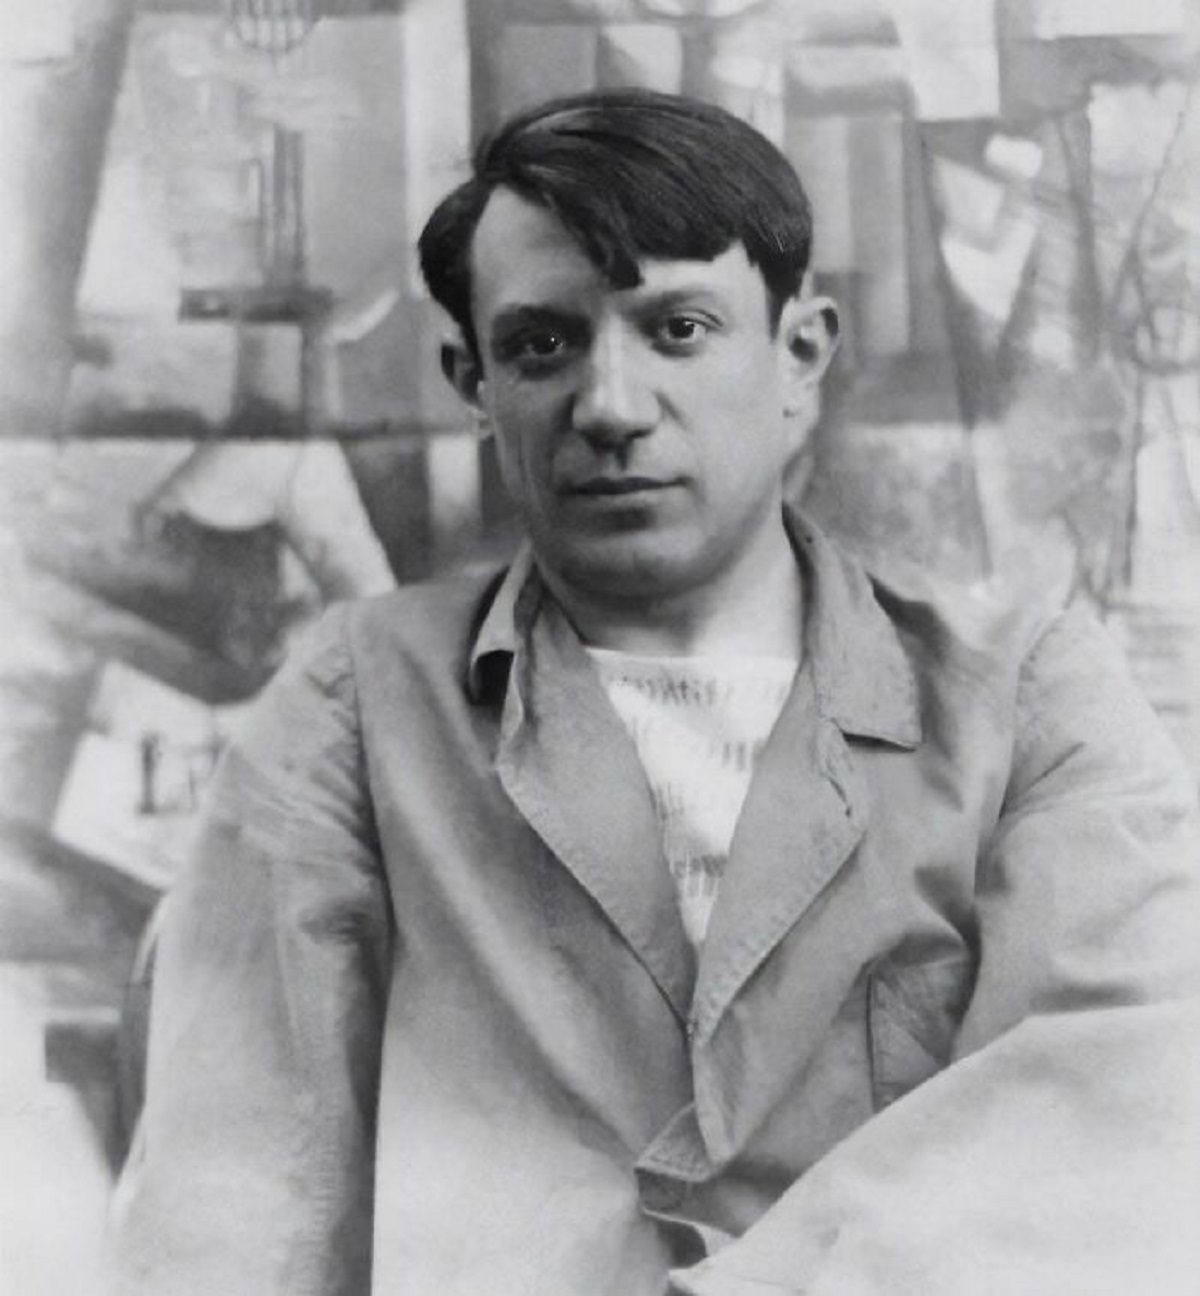 Pablo Picasso was an unrelenting bastard to his romantic partners. He once said "for me there are two kinds of women: goddesses and doormats." And his granddaughter described his treatment of the women in his life by saying: "He submitted them to his animal sexuality, tamed them, bewitched them, ingested them, and crushed them onto his canvas. After he had spent many nights extracting their essence, once they were bled dry, he would dispose of them."

And that wasn't hyperbole, two of Picasso's partners suffered nervous breakdowns due to his emotional abuse. Worse yet his lover Marie-Thèrése Walter and his second wife Jacqueline Roque were driven to [self-harm].